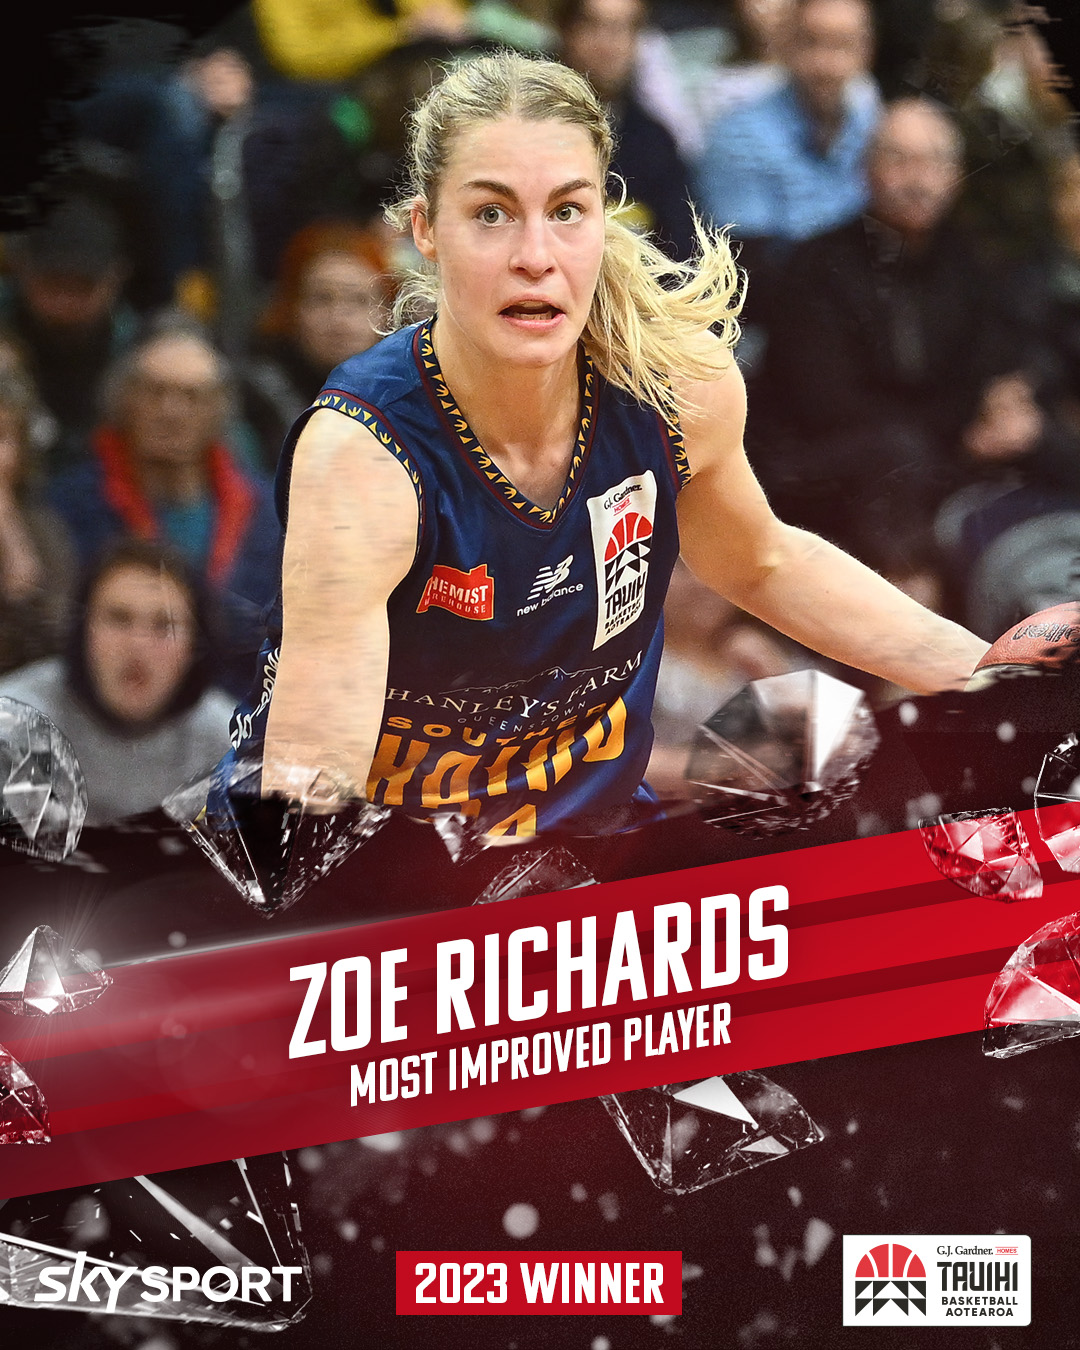 Most Improved Player (Zoe Richards)